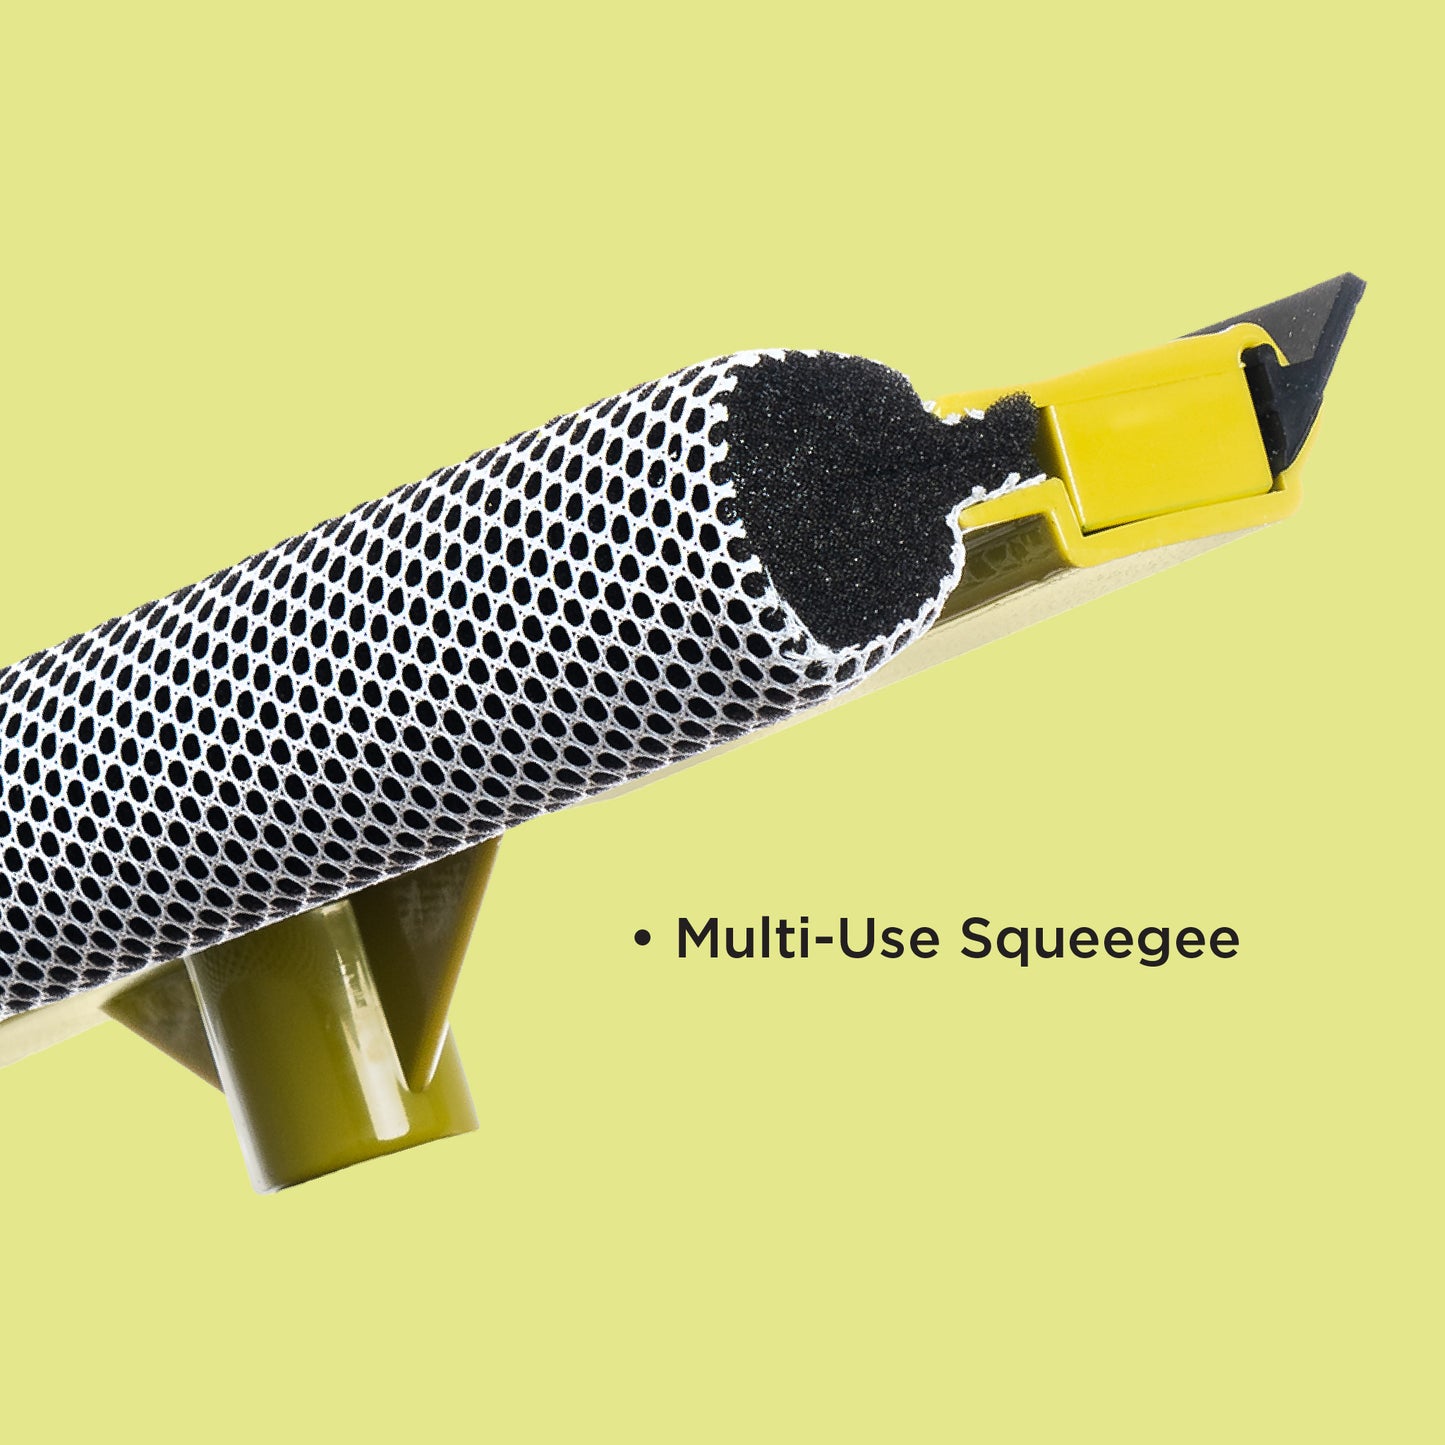 multi-use Squeegee close-up